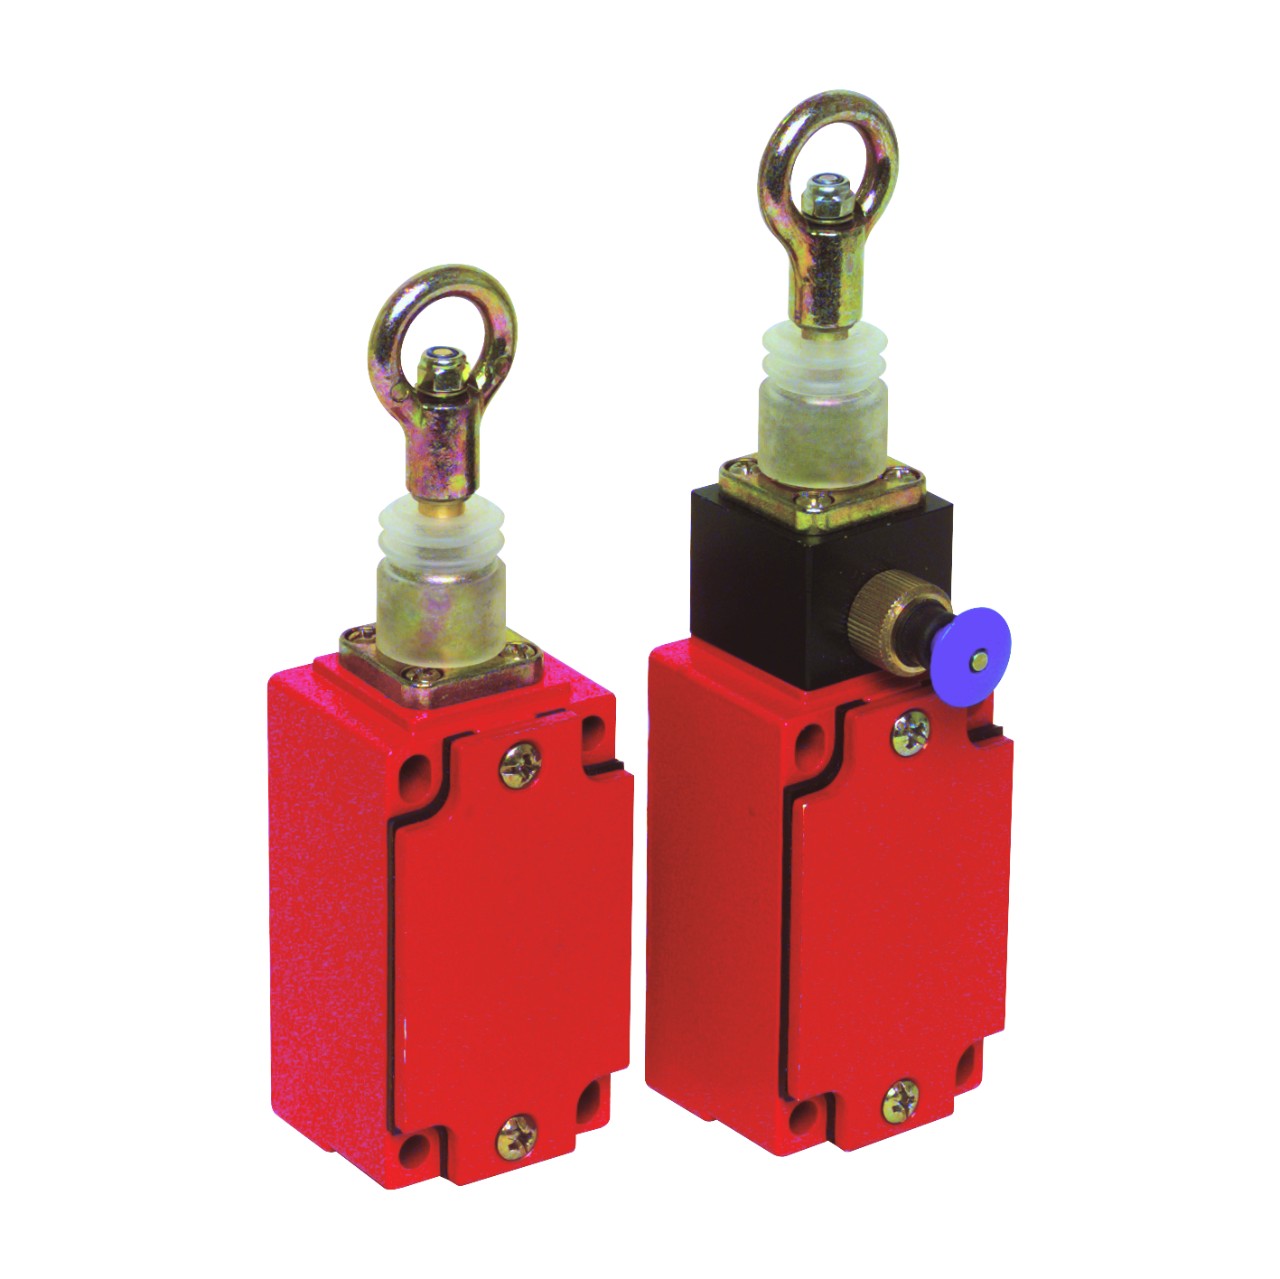 https://0201.nccdn.net/4_2/000/000/076/de9/safety-rope-pull-switches-for-stop-control.img.png